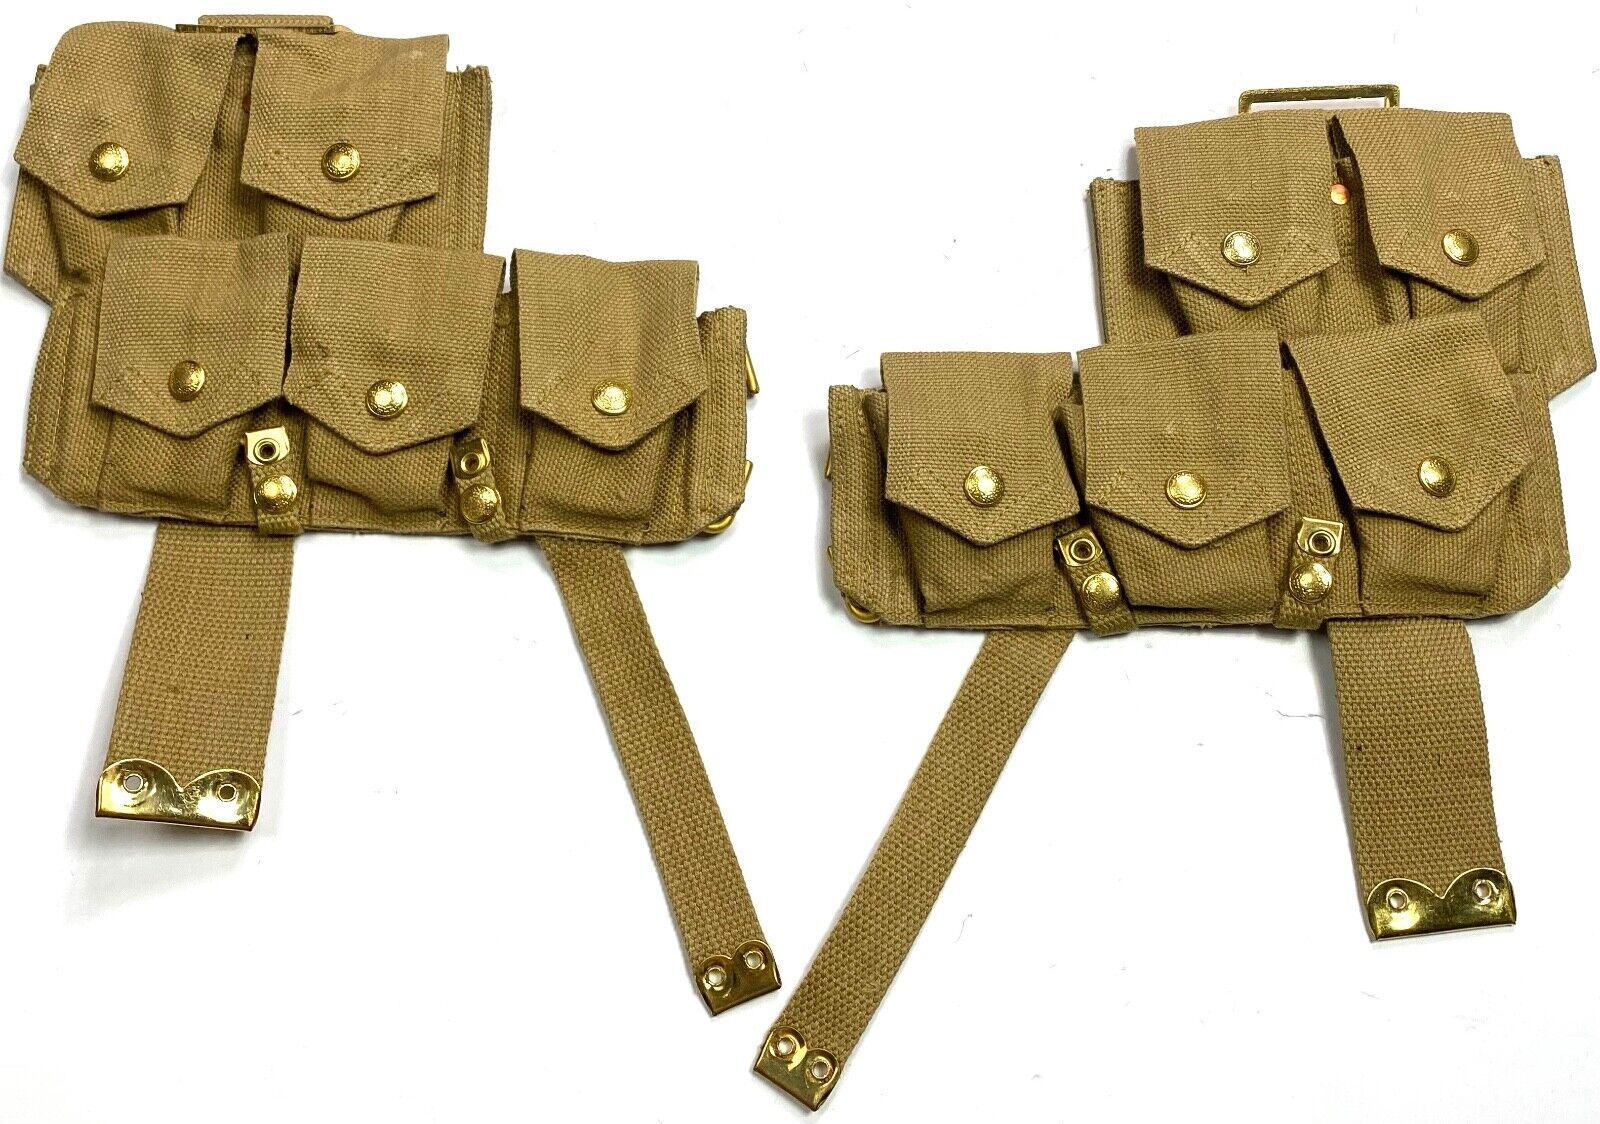 WWI BRITISH WEALTH INFANTRY P1908 P08 ENFIELD RIFLE WEB AMMO POUCHES-PAIR